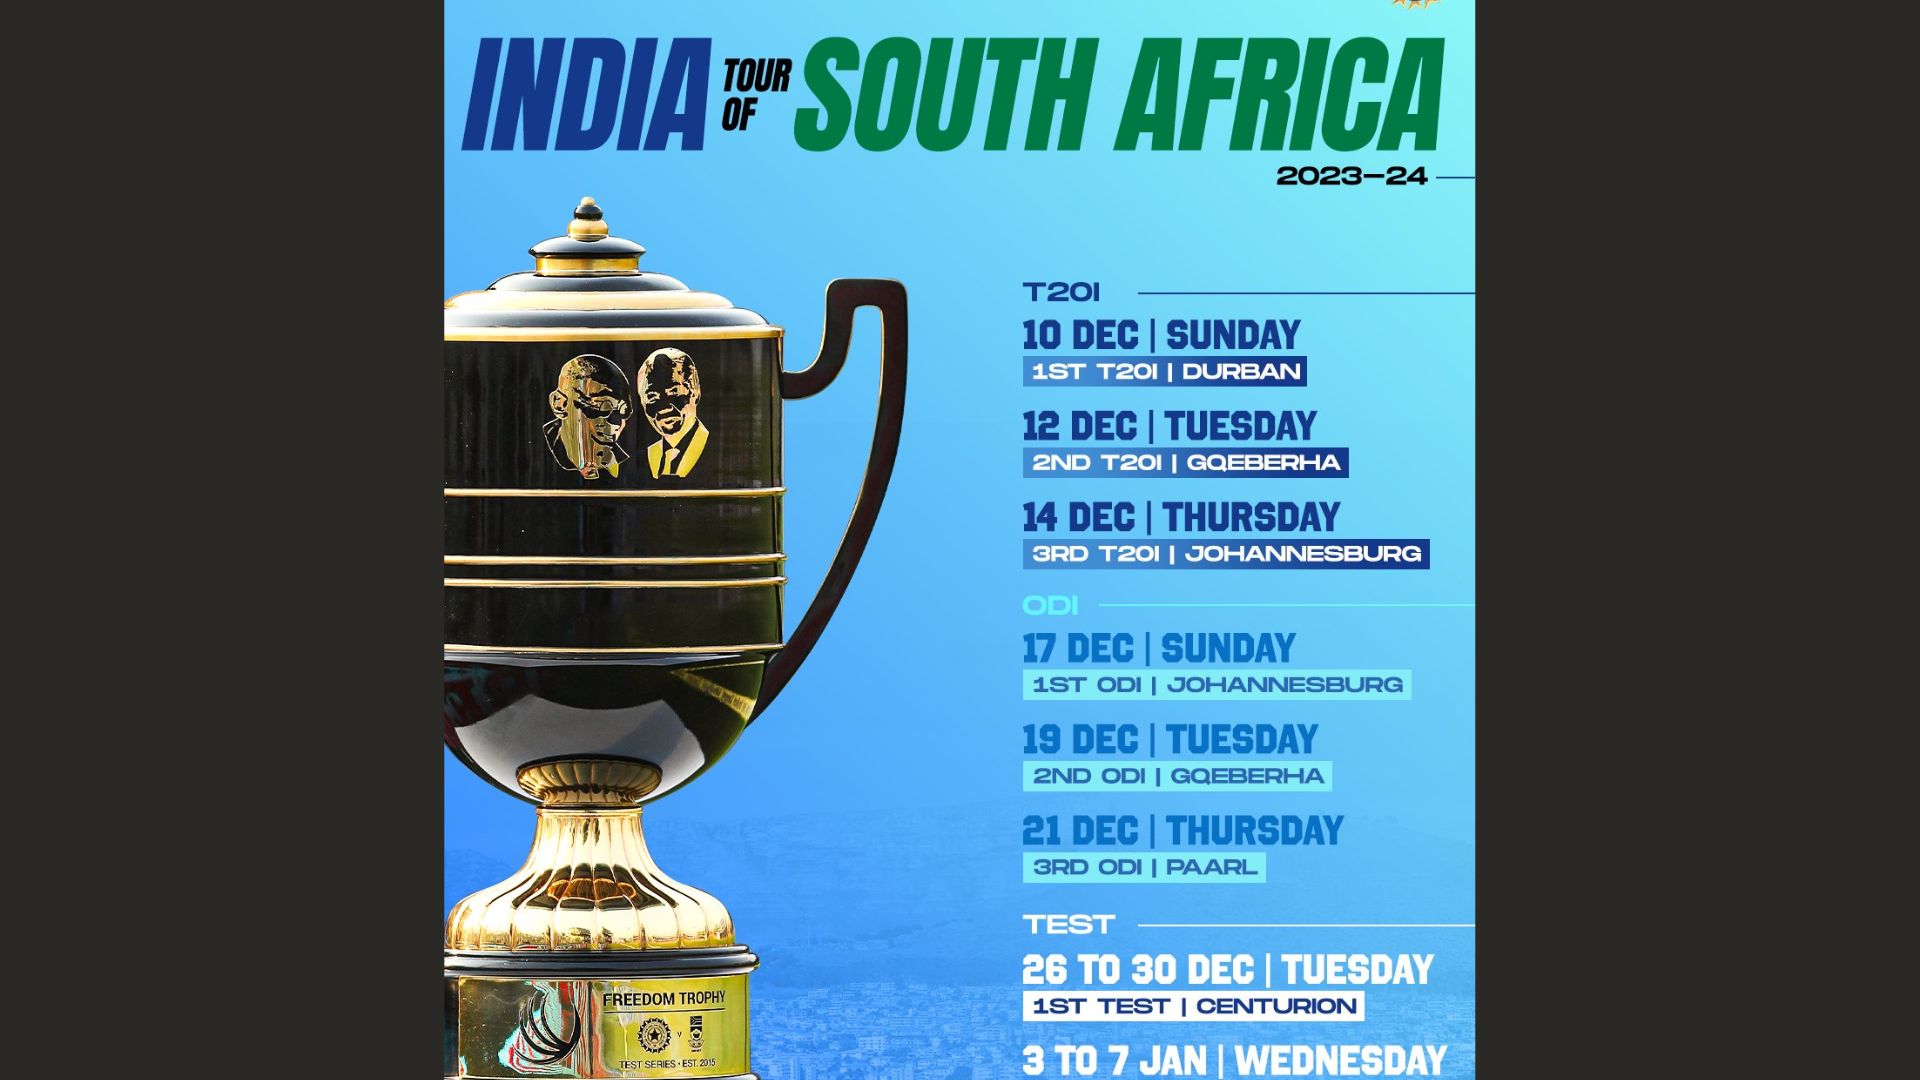 India South Africa 2023-24 cricket series